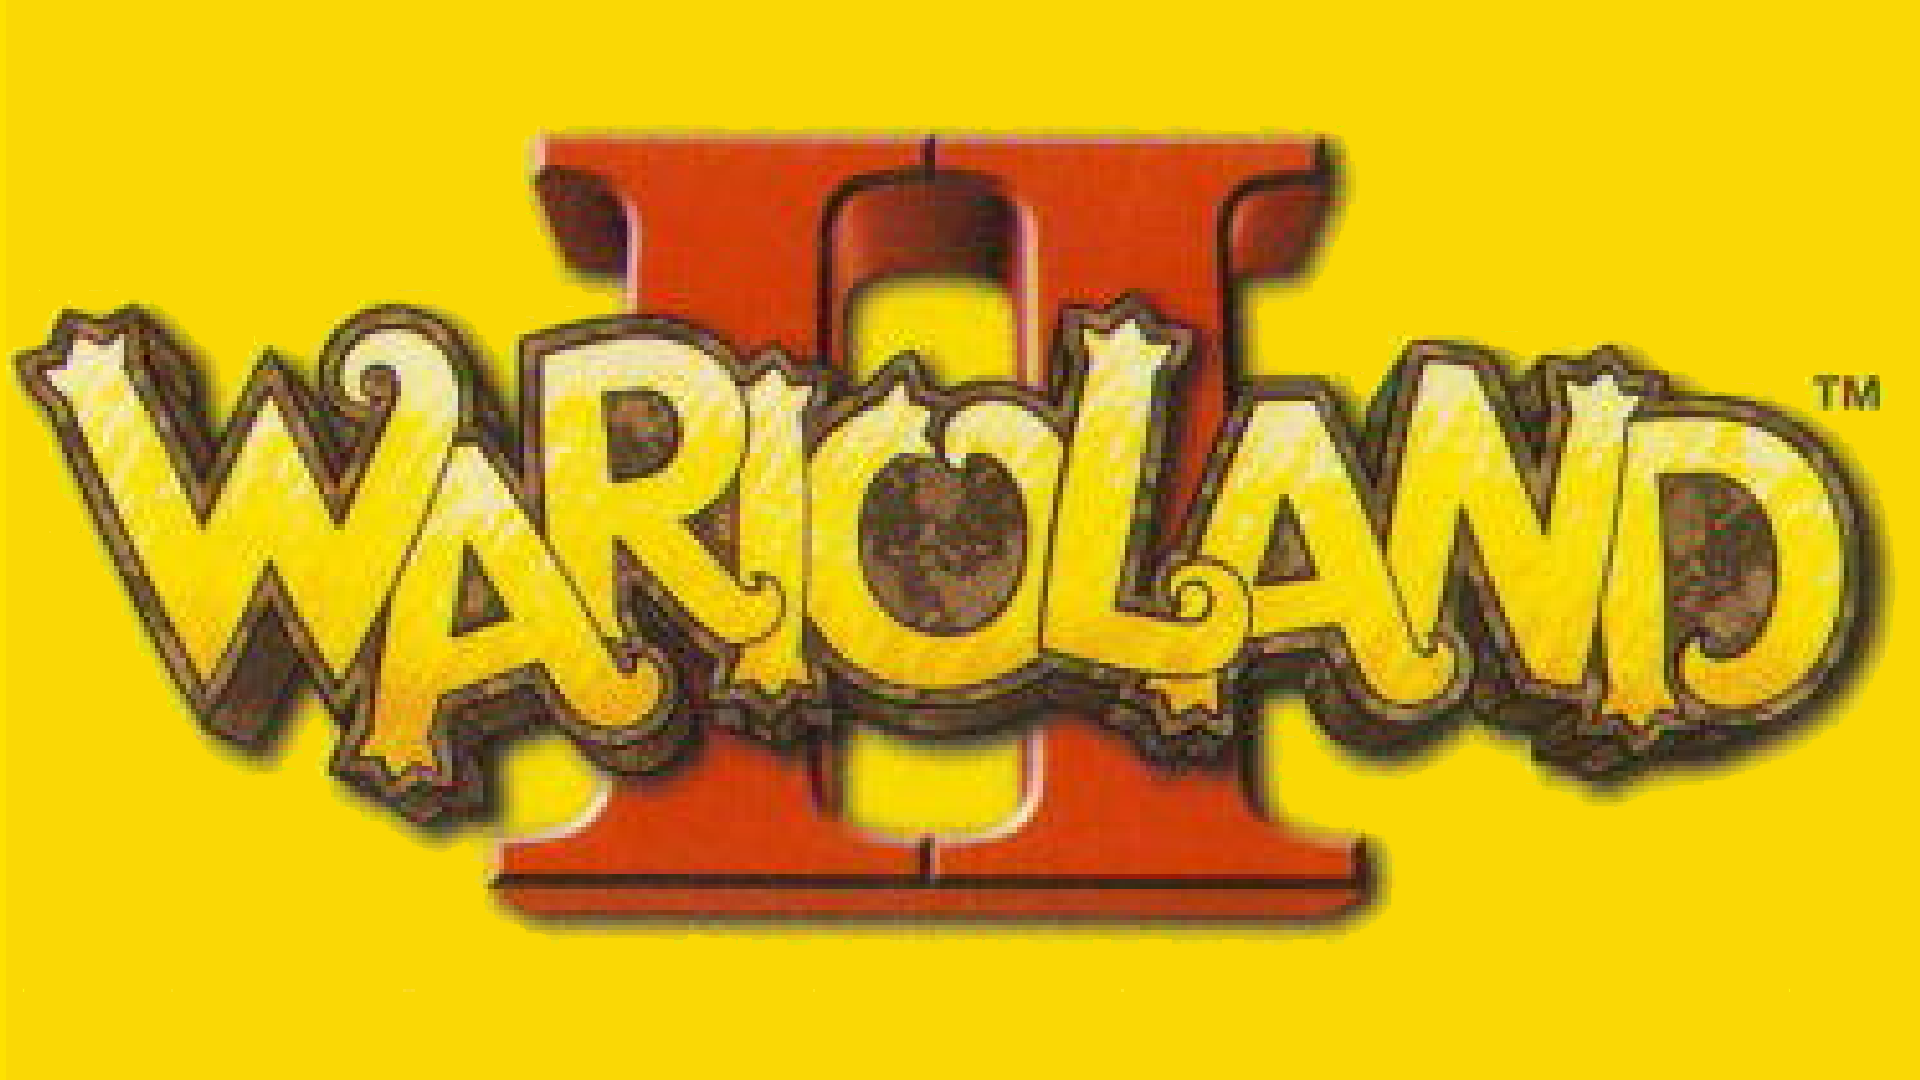 Wario Land II Backgrounds, Compatible - PC, Mobile, Gadgets| 1920x1080 px